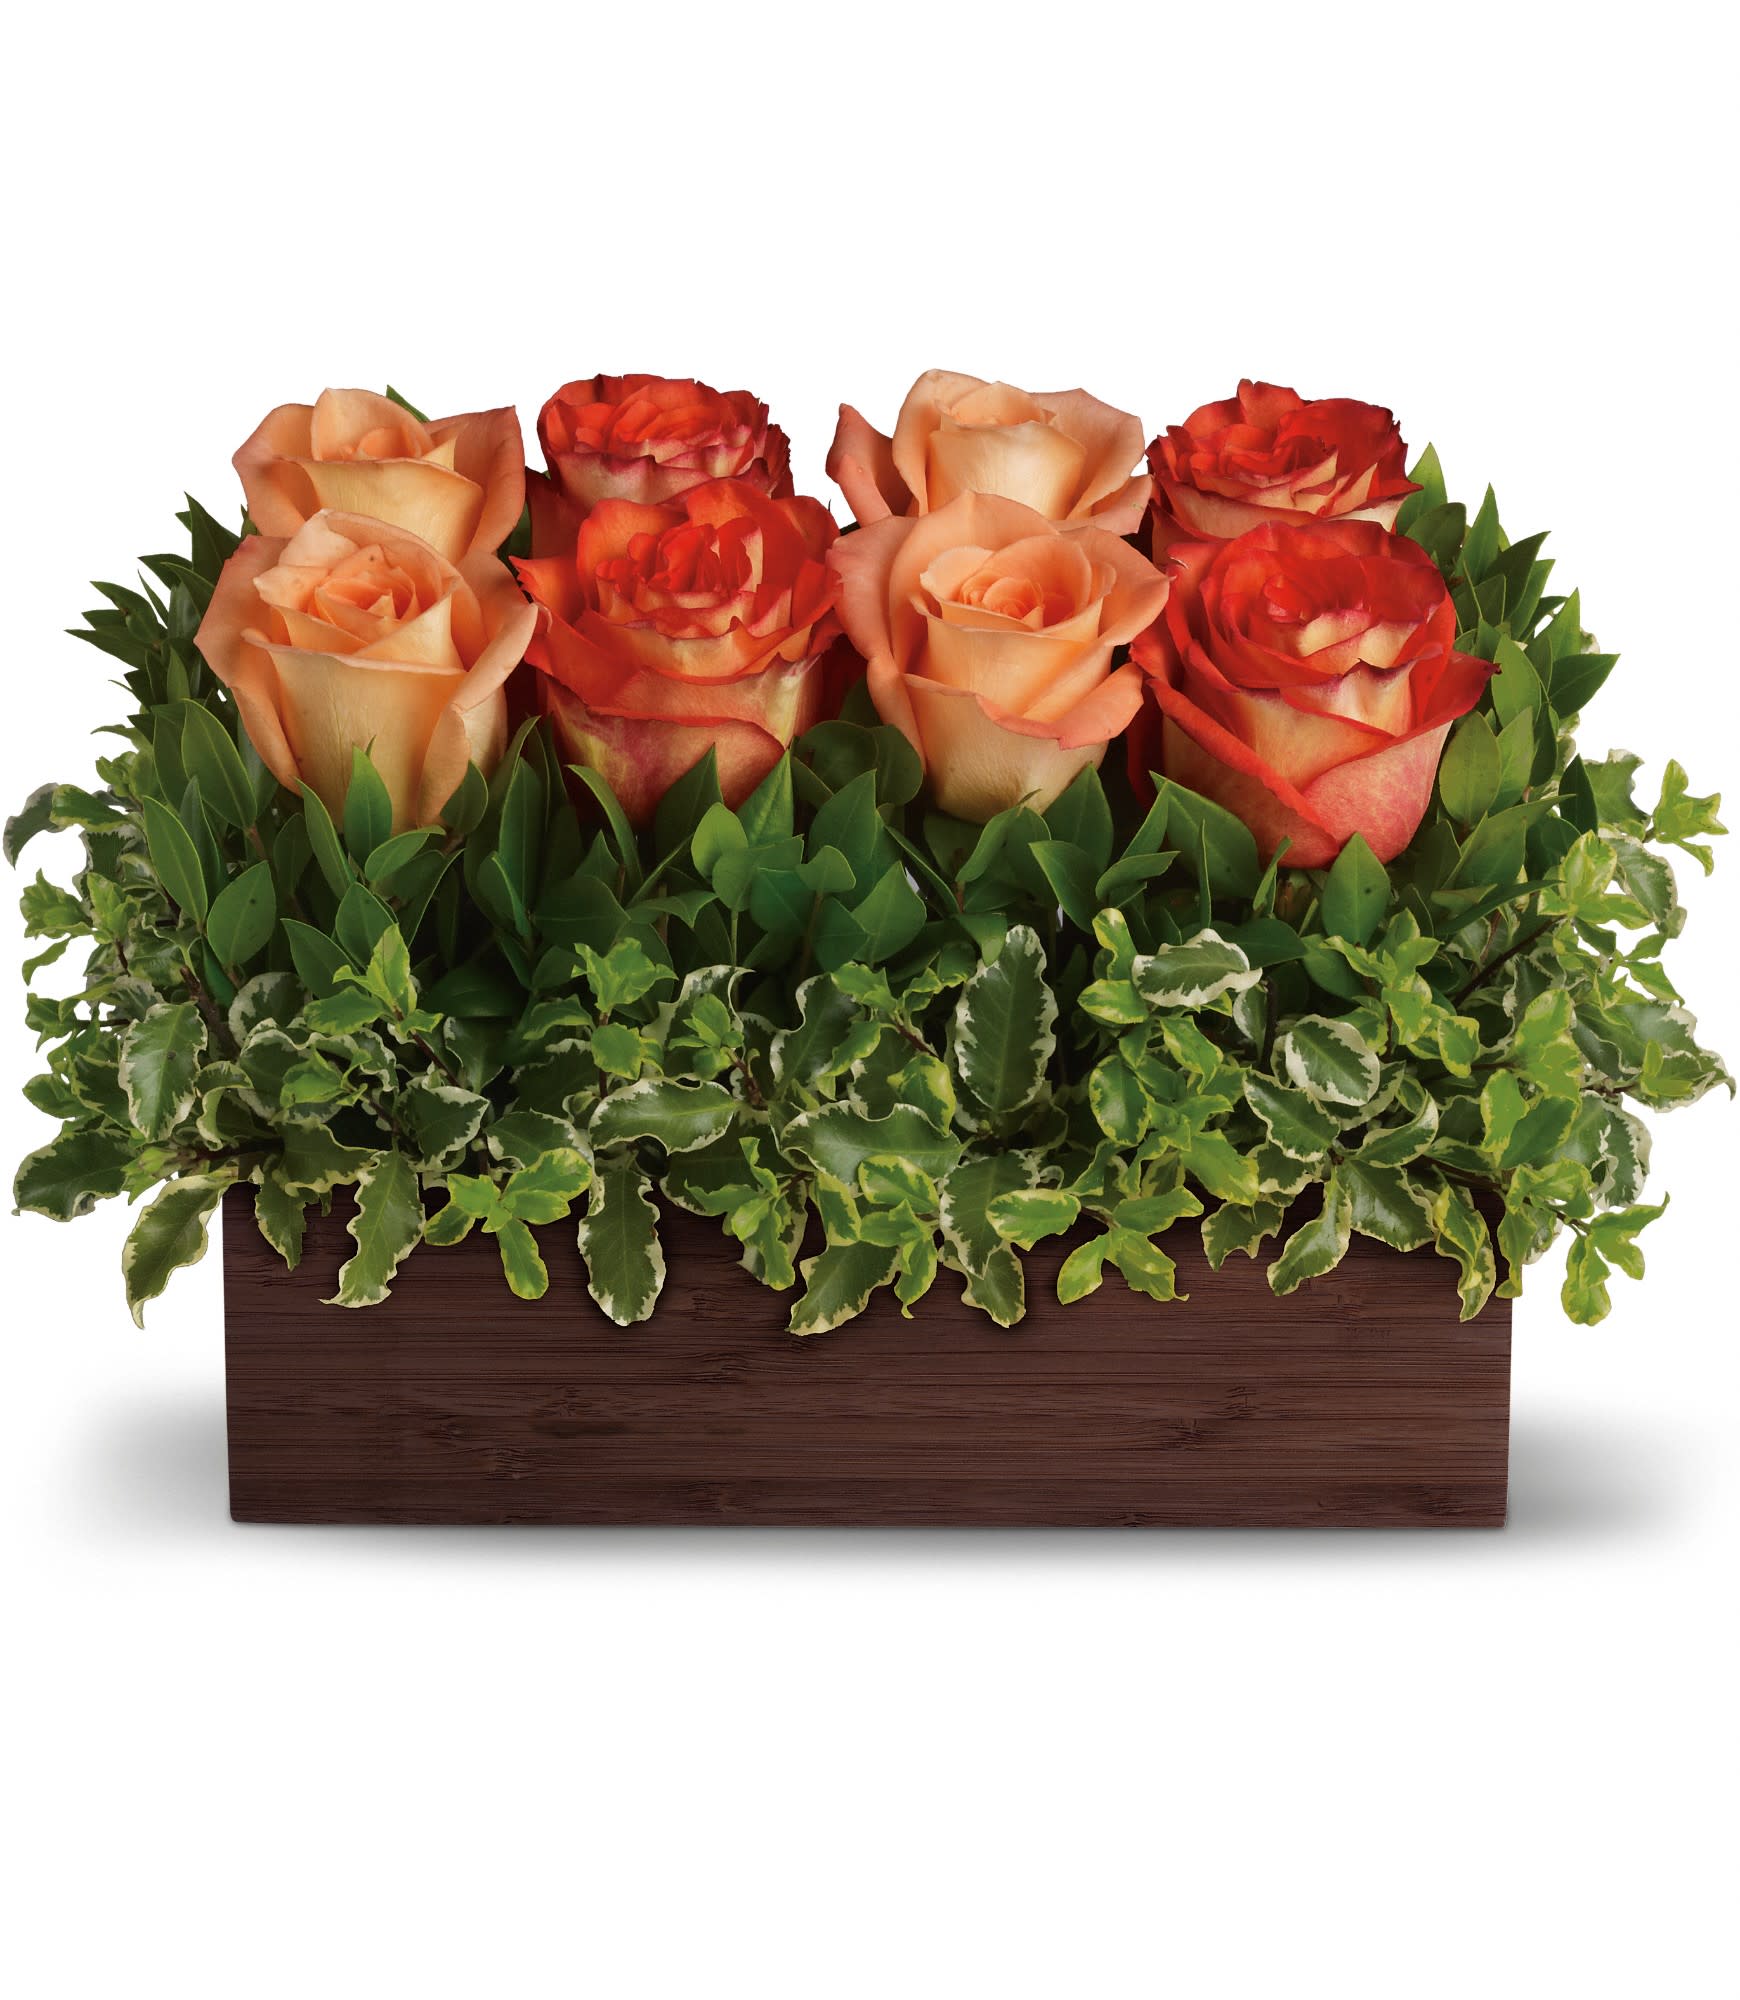  Uptown Bouquet - An arrangement worthy of your uptown girl, this one rocks! Modern without being trendy. Gorgeous without being girly. If your woman knows style, this is the gift for her.  Outrageously beautiful dark orange and peach roses are nestled in a garden of greens and delivered in a unique bamboo rectangle. Go ahead: show her that you get it.  Approximately 14&quot; W x 9 1/2&quot; H  Orientation: All-Around  As Shown : T72-3A Deluxe : T72-3B Premium : T72-3C